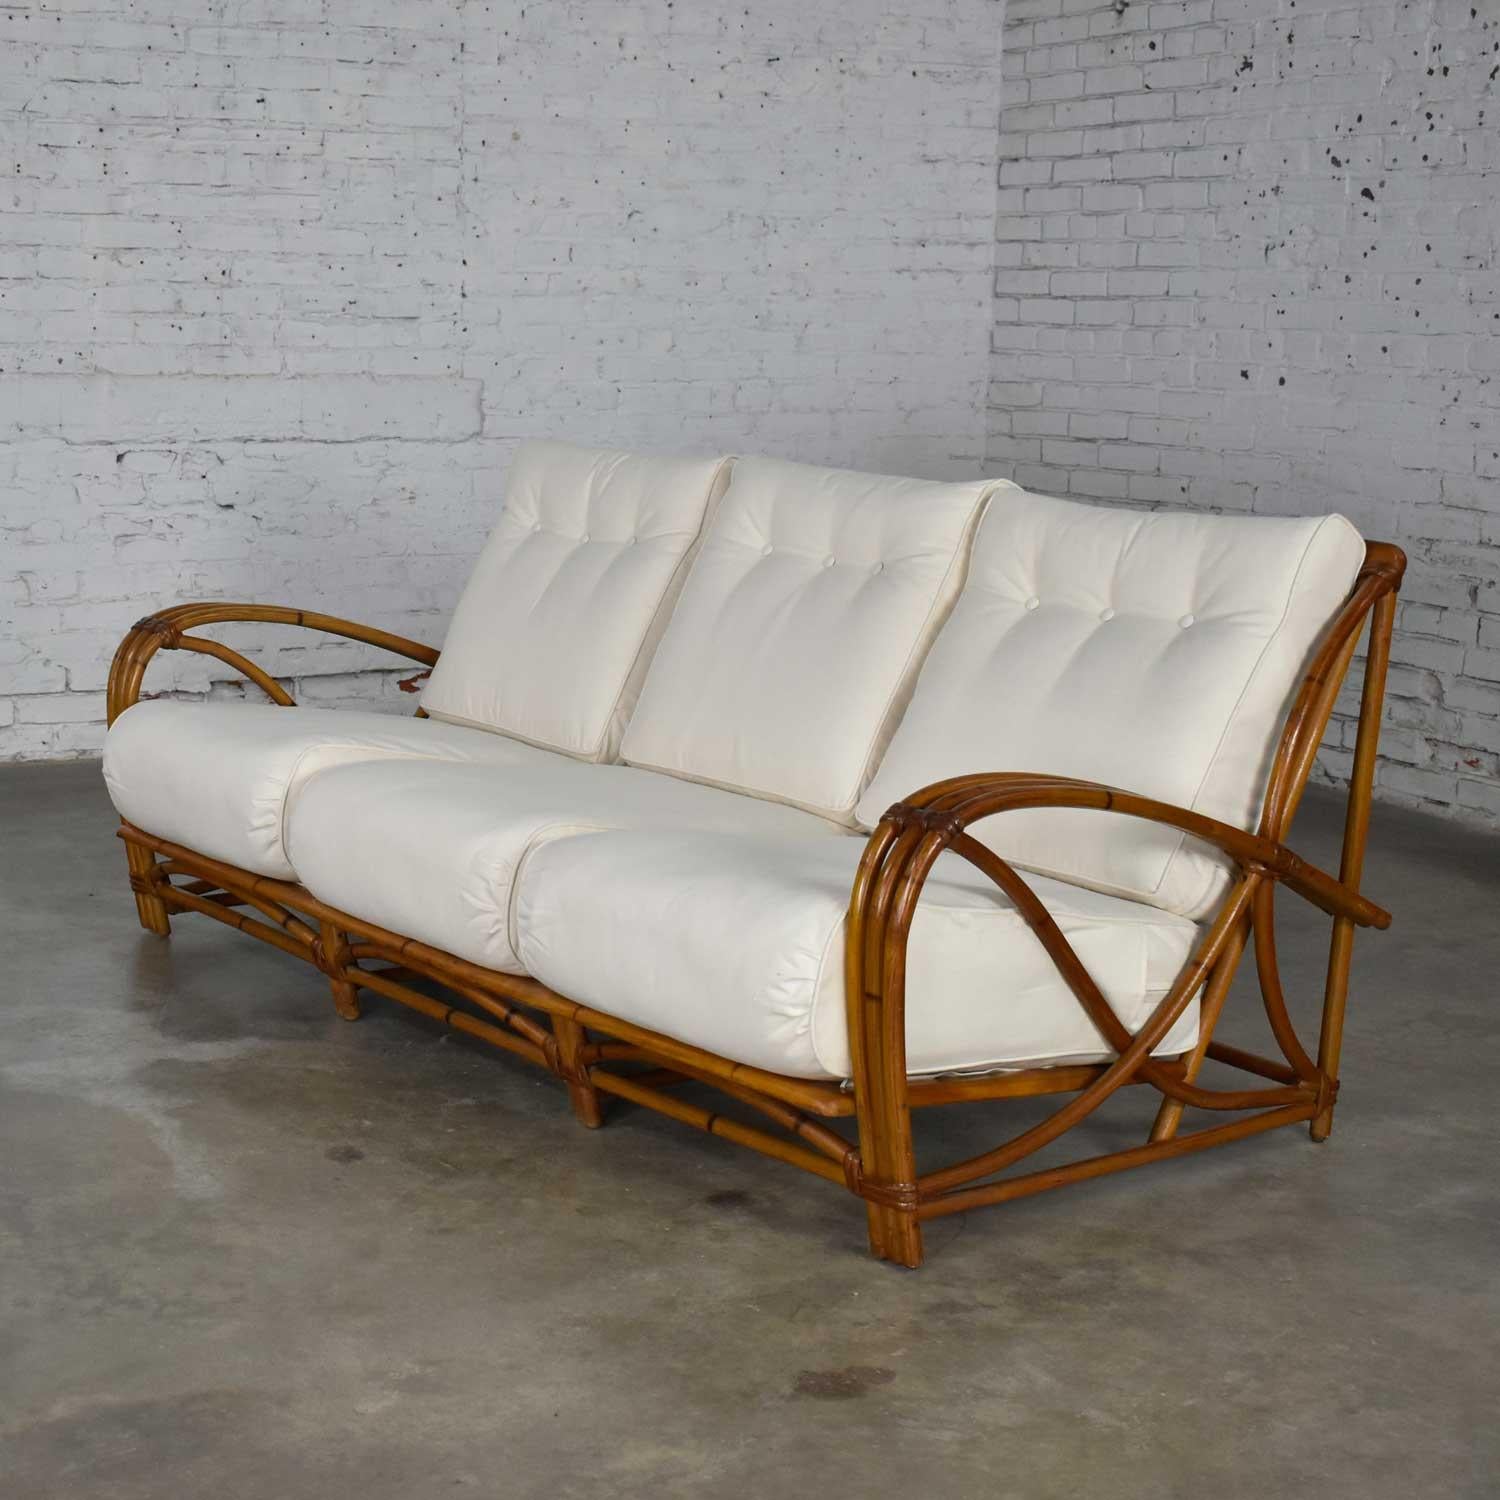 Wonderful vintage Heywood Wakefield rattan sofa with new off-white canvas upholstery. We will be including the original barkcloth zip-off covers as well. Beautiful condition with wear as you would expect with a vintage piece. There has been some